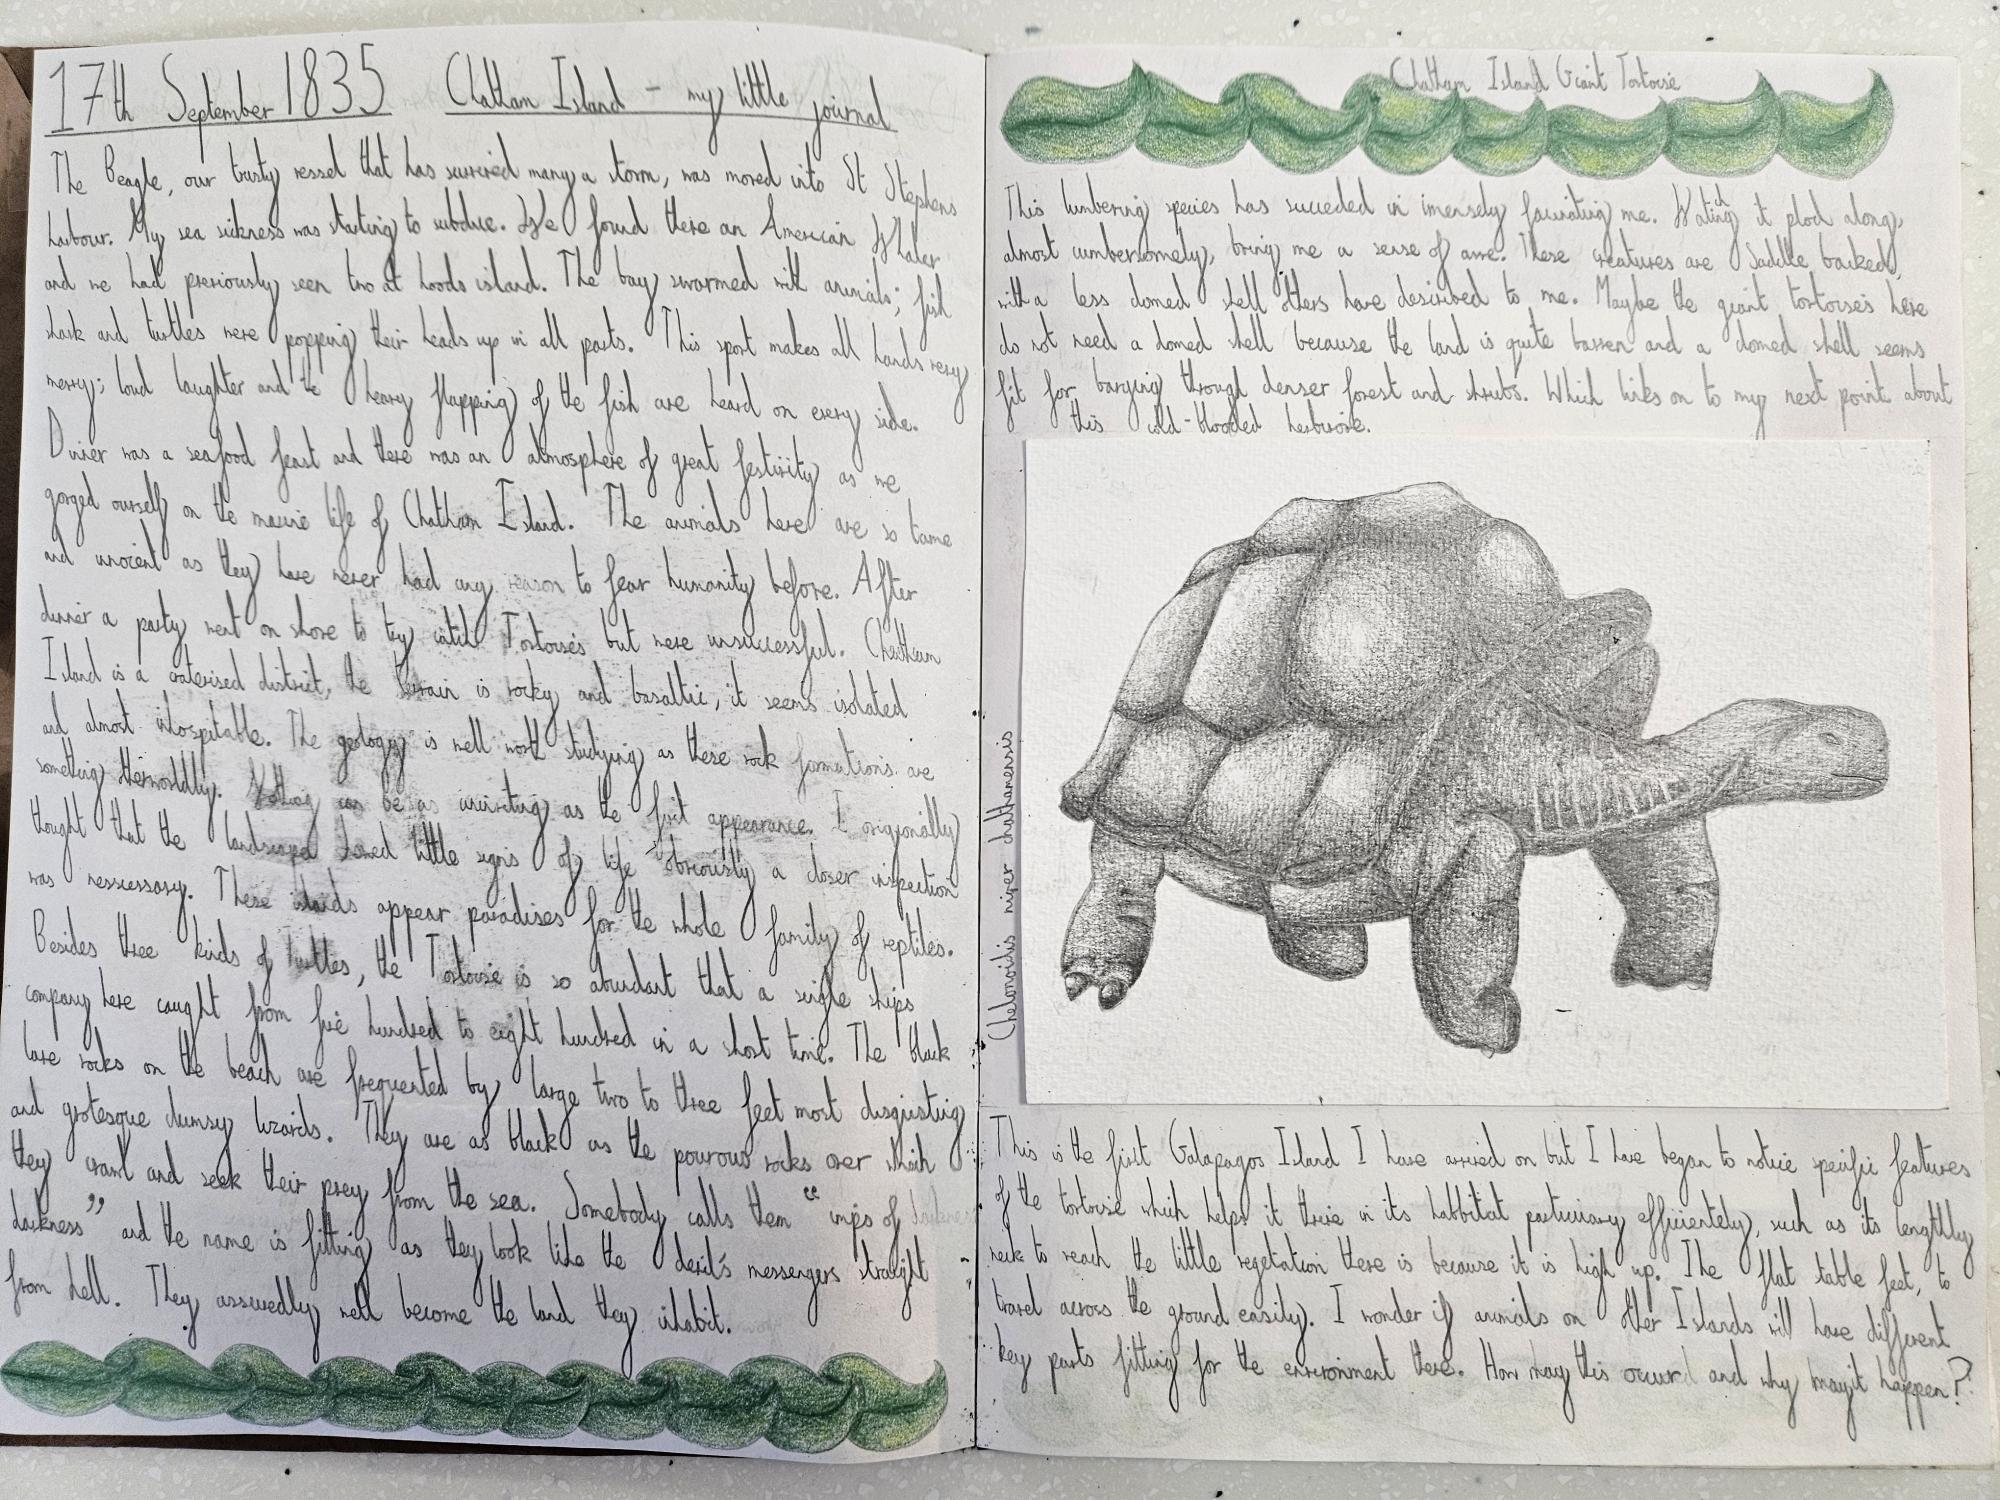 A science project with a beautiful sketch of a tortoise